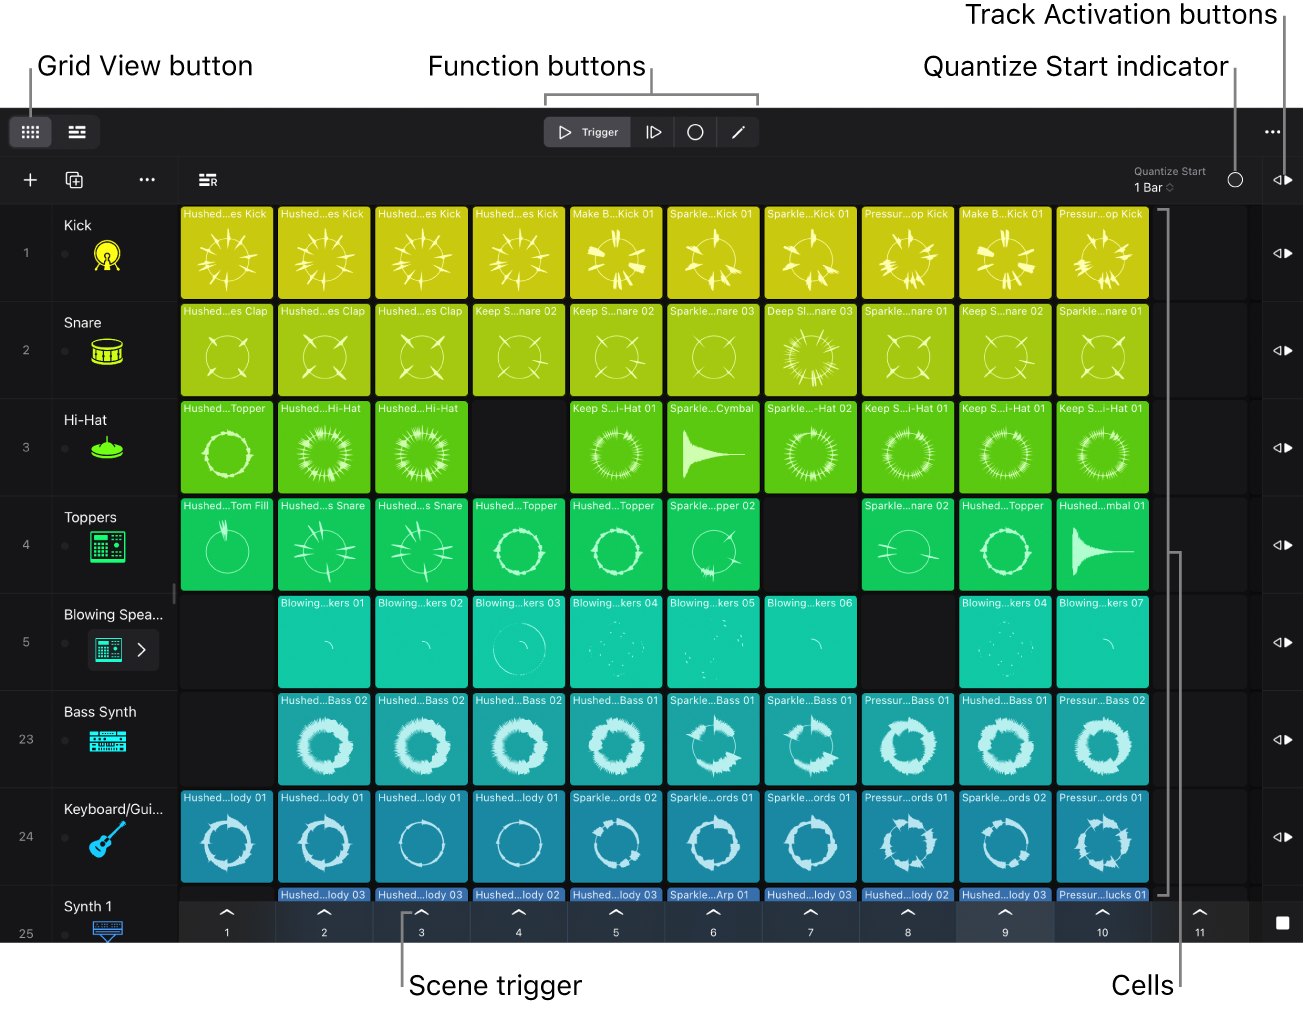 Figure. Live Loops grid showing cells, scene trigger, Function buttons, and Quantize Start button.